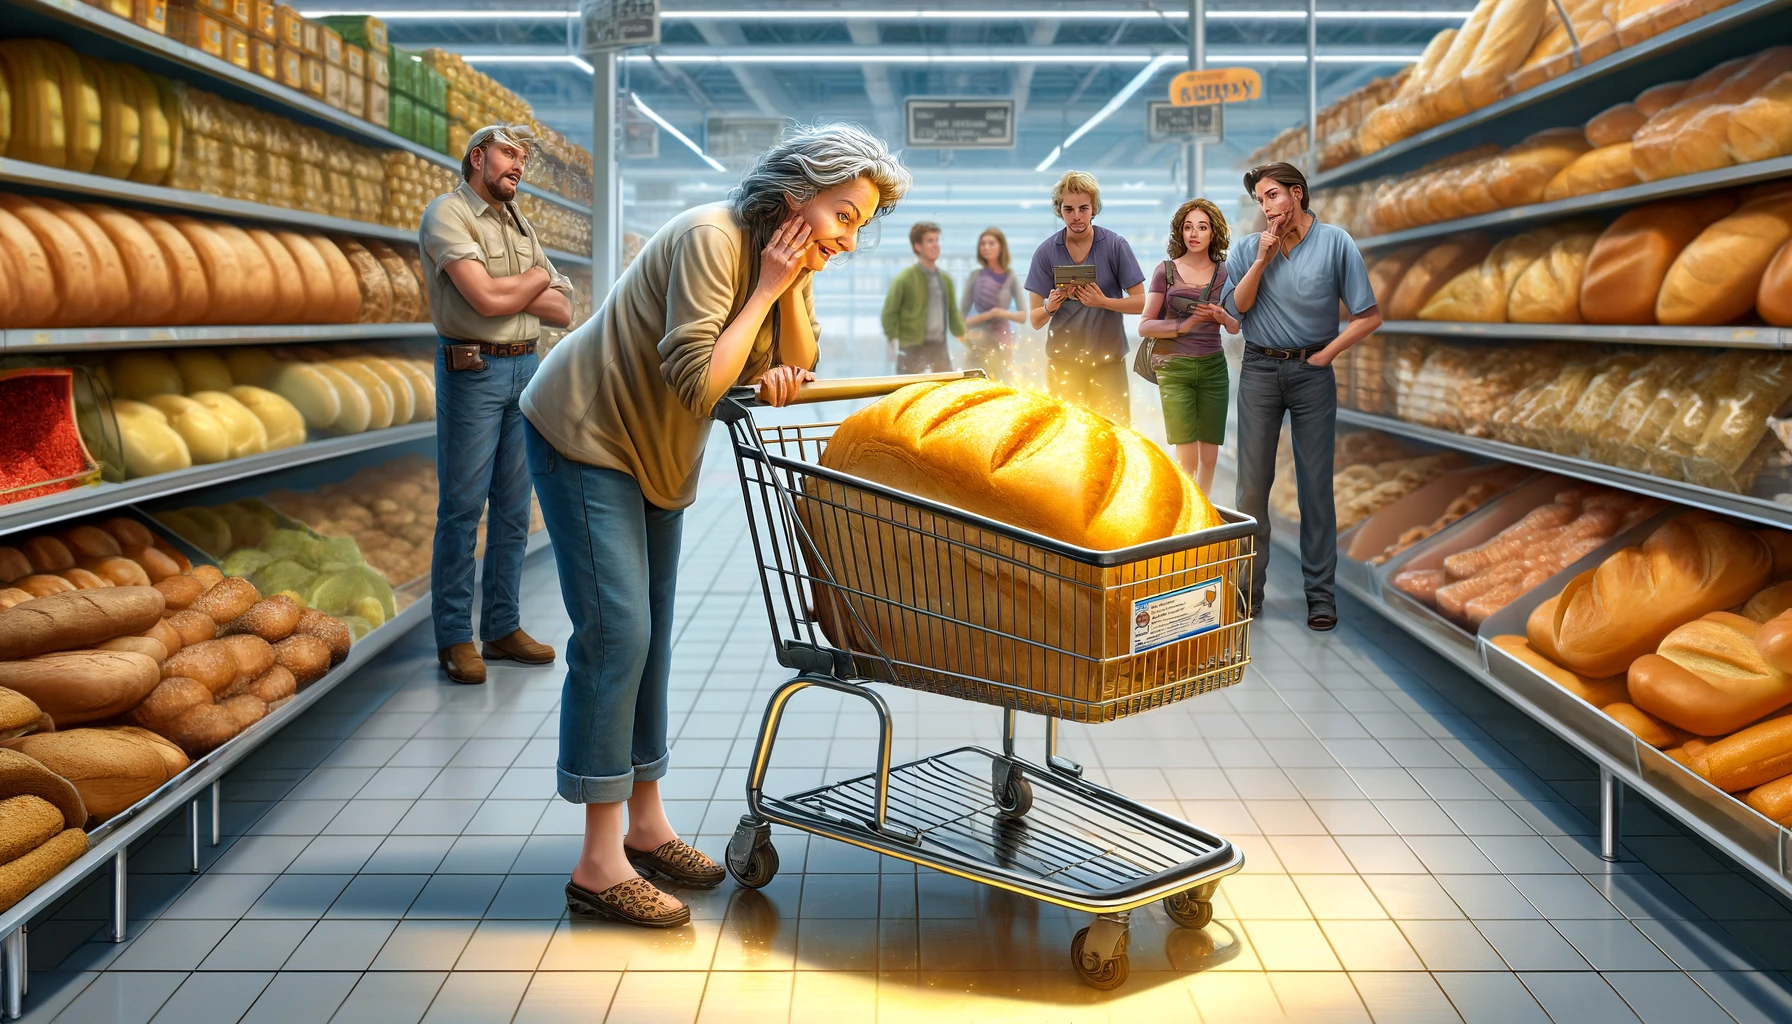 supermarket-offers-free-bread-after-1000-dollar-sales-csdn-inflation-rising-prices